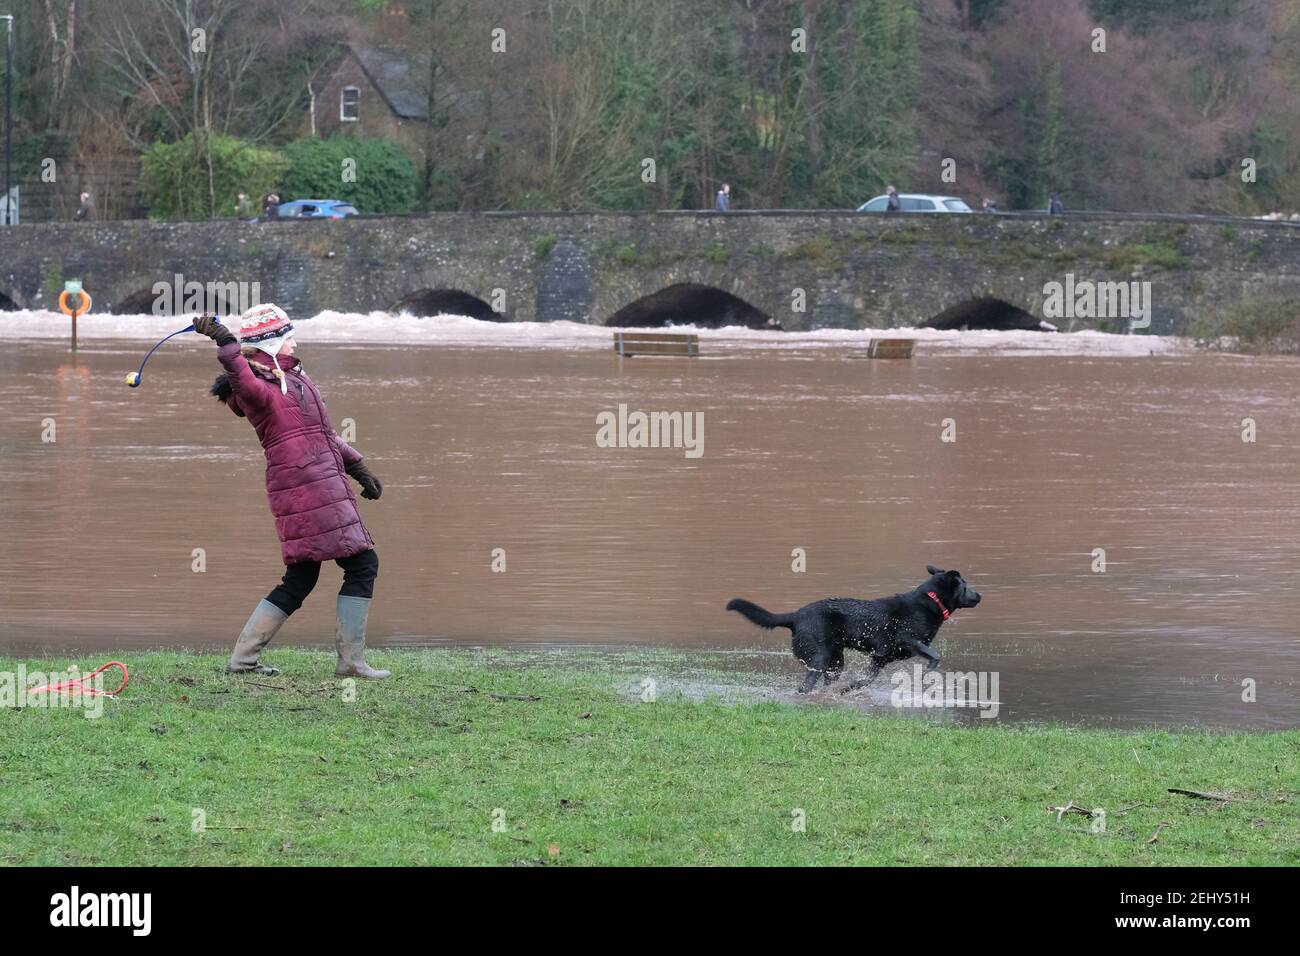 Abergavenny, Monmouthshire, Wales, UK - UK Weather - Saturday 20th February 2021 - People enjoying some lockdown exercise beside the flooded River Usk. The River Usk is now in fast flow and has started to overflow its banks after heavy rain over the past 24 hours in south Wales. The forecast is for more rain. Photo Steven May / Alamy Live News Stock Photo